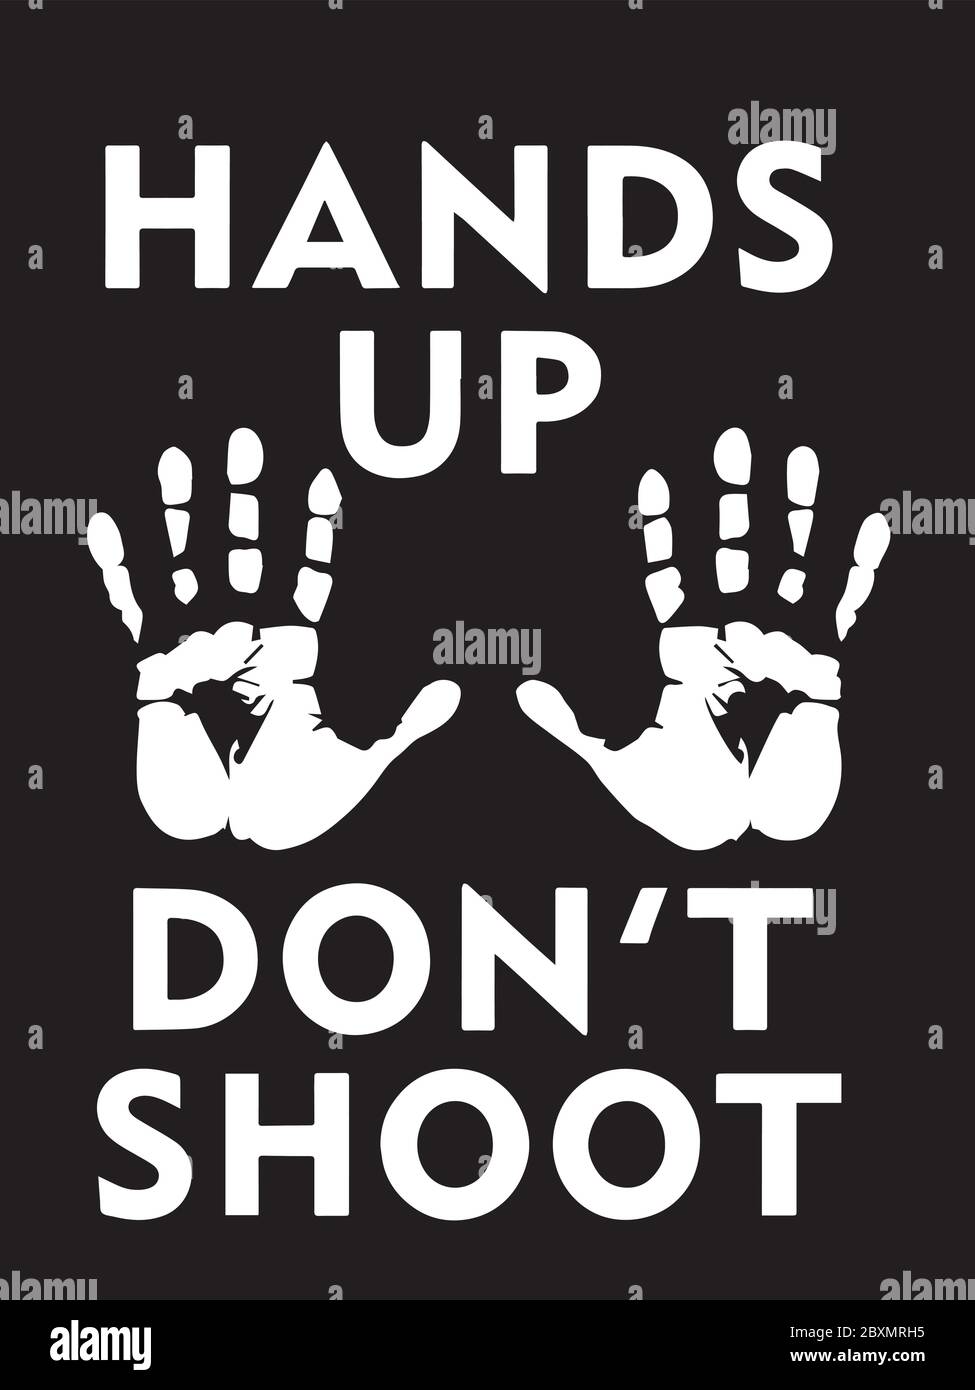 Hands Up Dont Shoot with Palms. Illustration depicting Black Lives Matter Poster Hands Up. Black and white EPS Vector File. Stock Vector